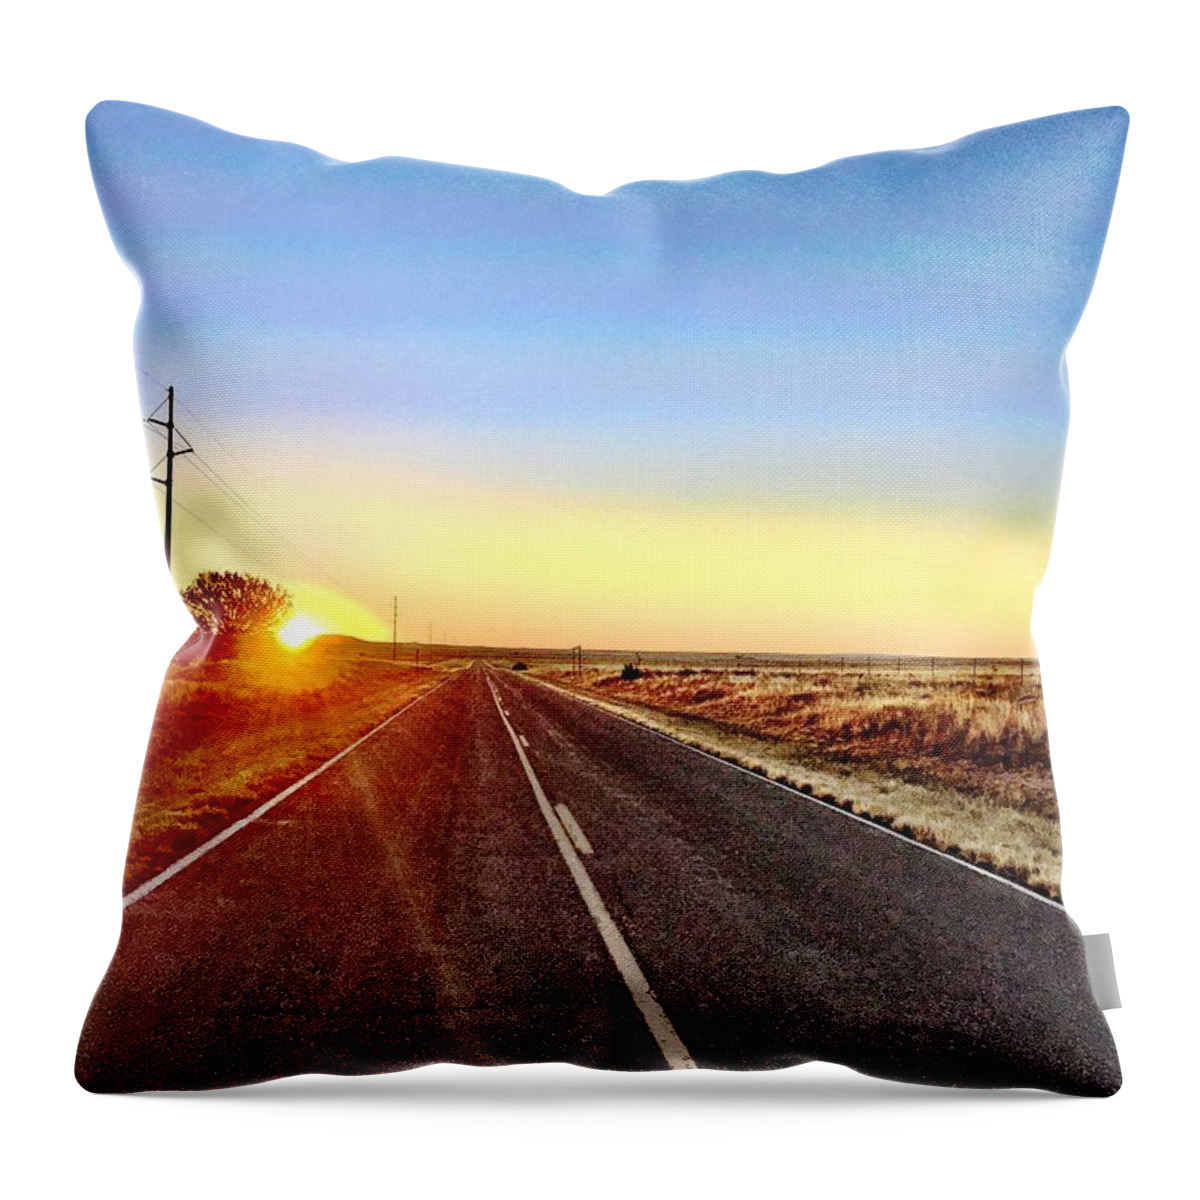 Sunrise Throw Pillow featuring the photograph Sunrise Road by Brad Hodges